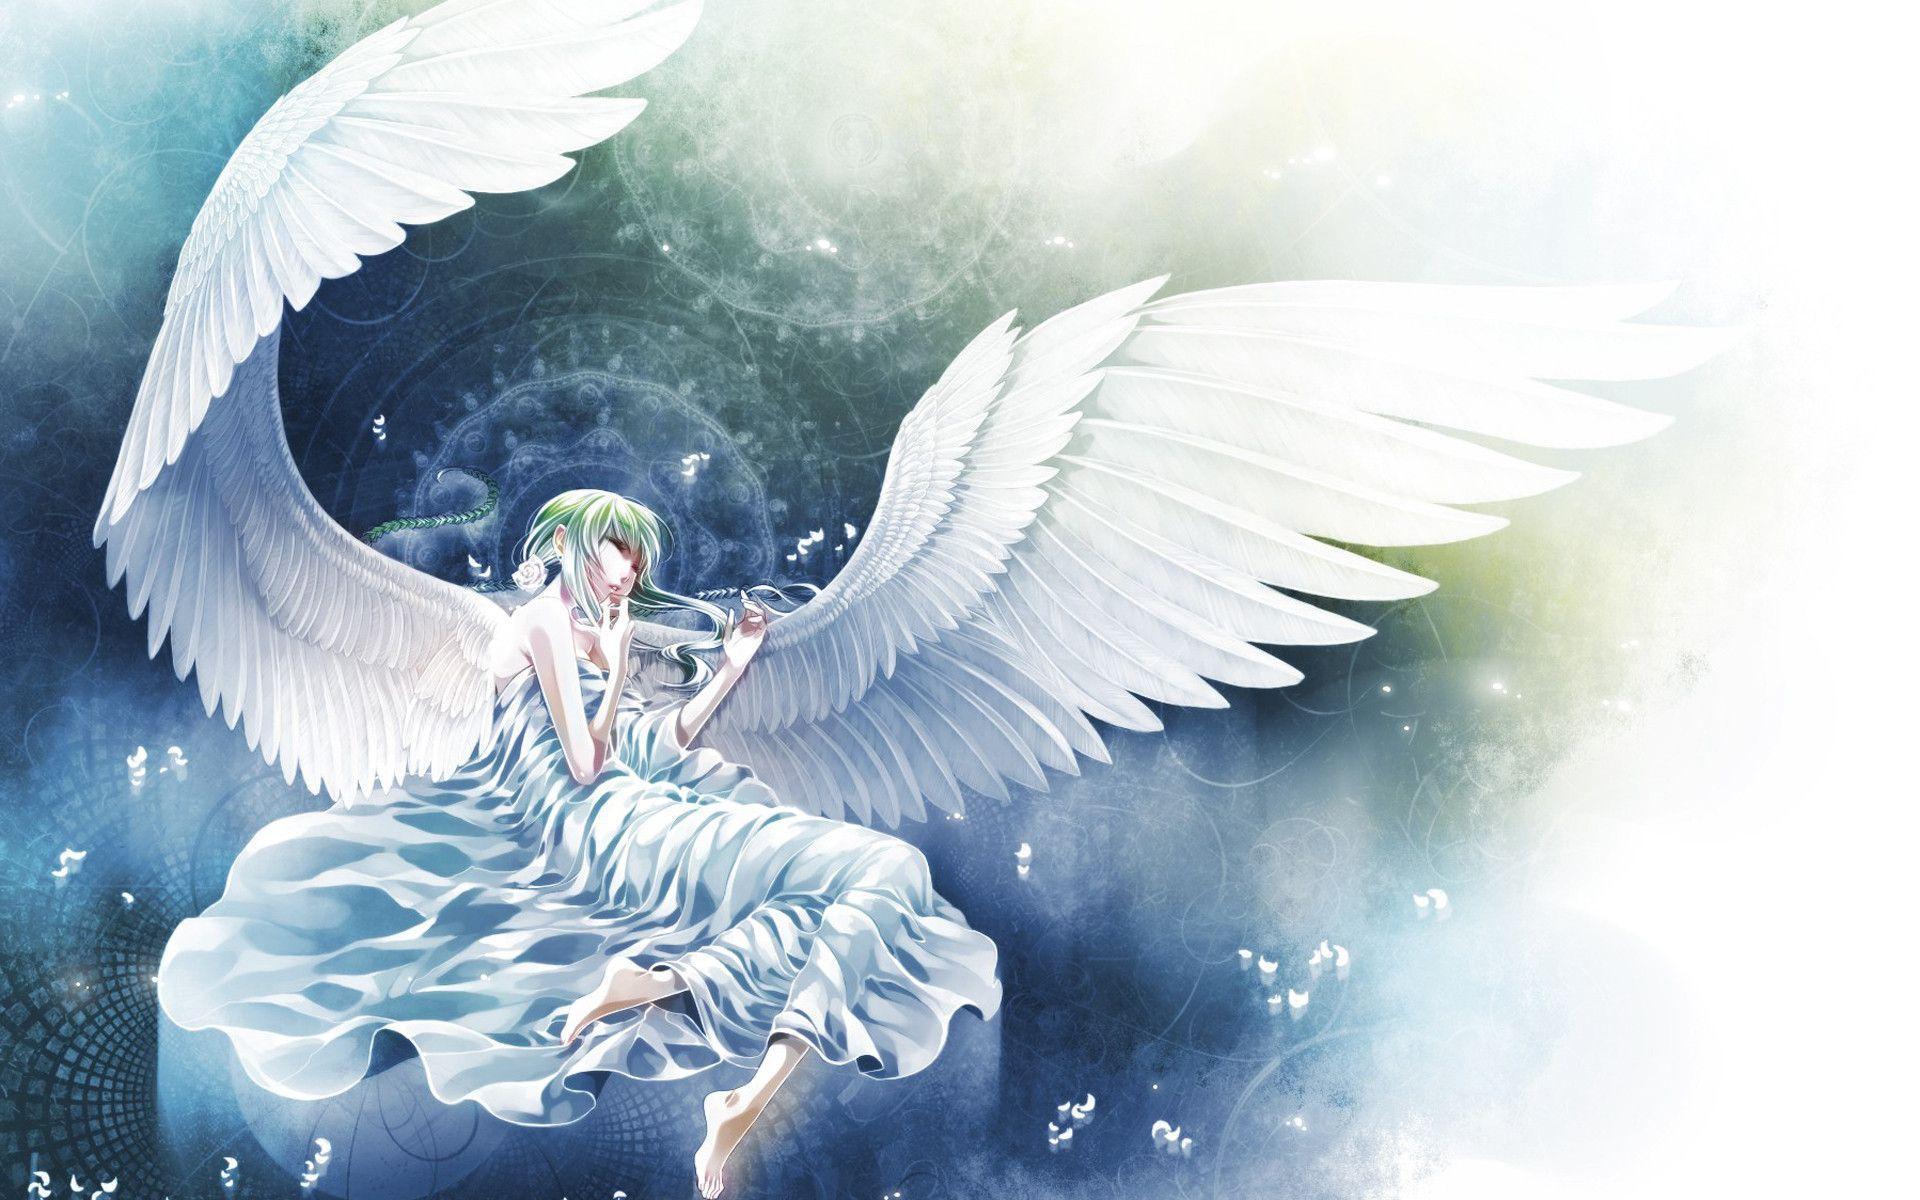 Download New Anime Angel White Full Just Another High Wallpaper